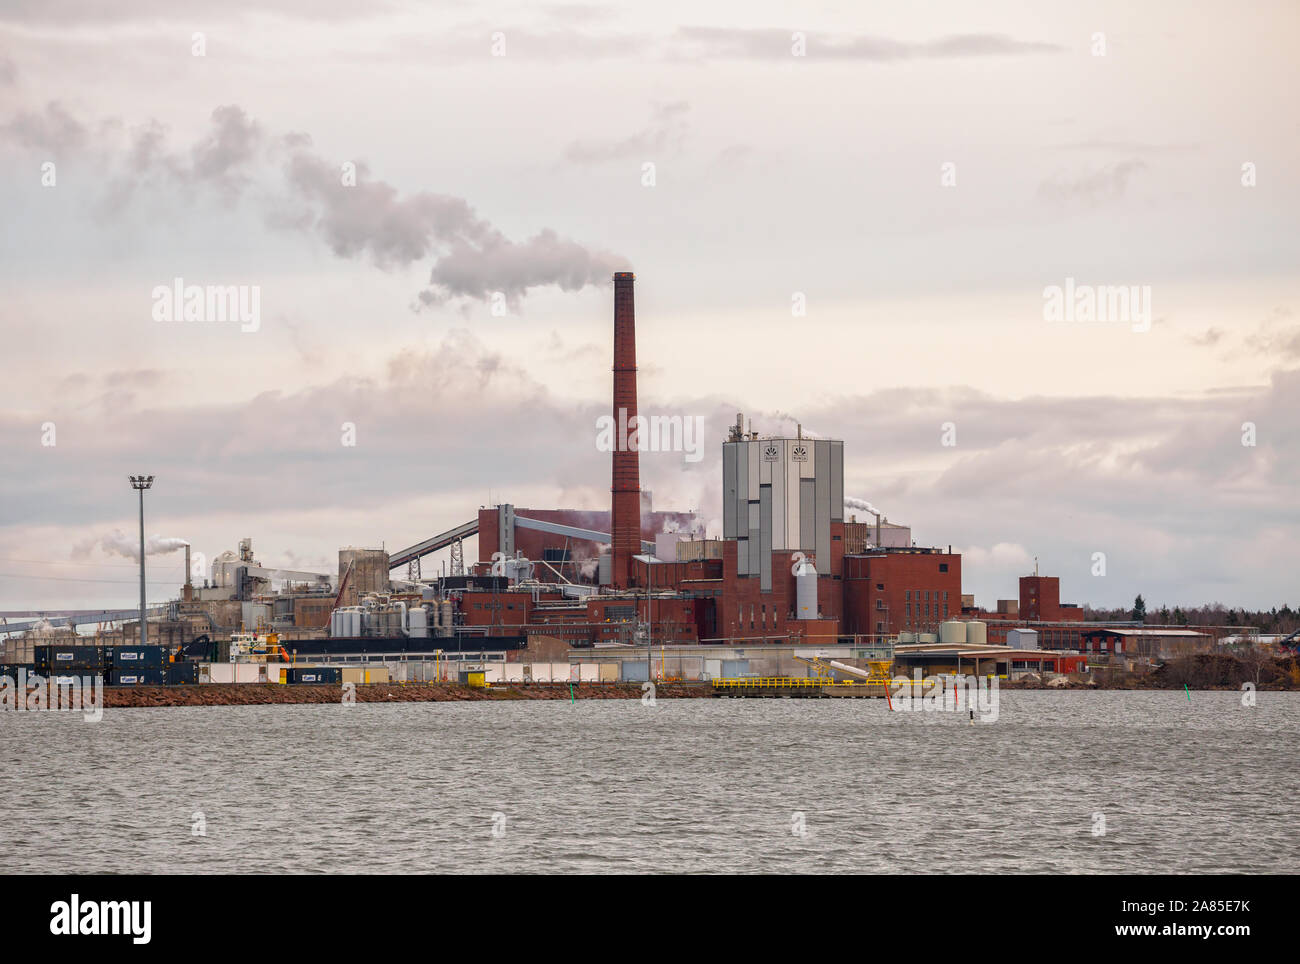 KOTKA, FINLAND - NOVEMBER 02, 2019: Sunila pulp and paper mill of Stora  Enso Oyj corporation on shore of Gulf of Finland. Red brick industrial  buildin Stock Photo - Alamy